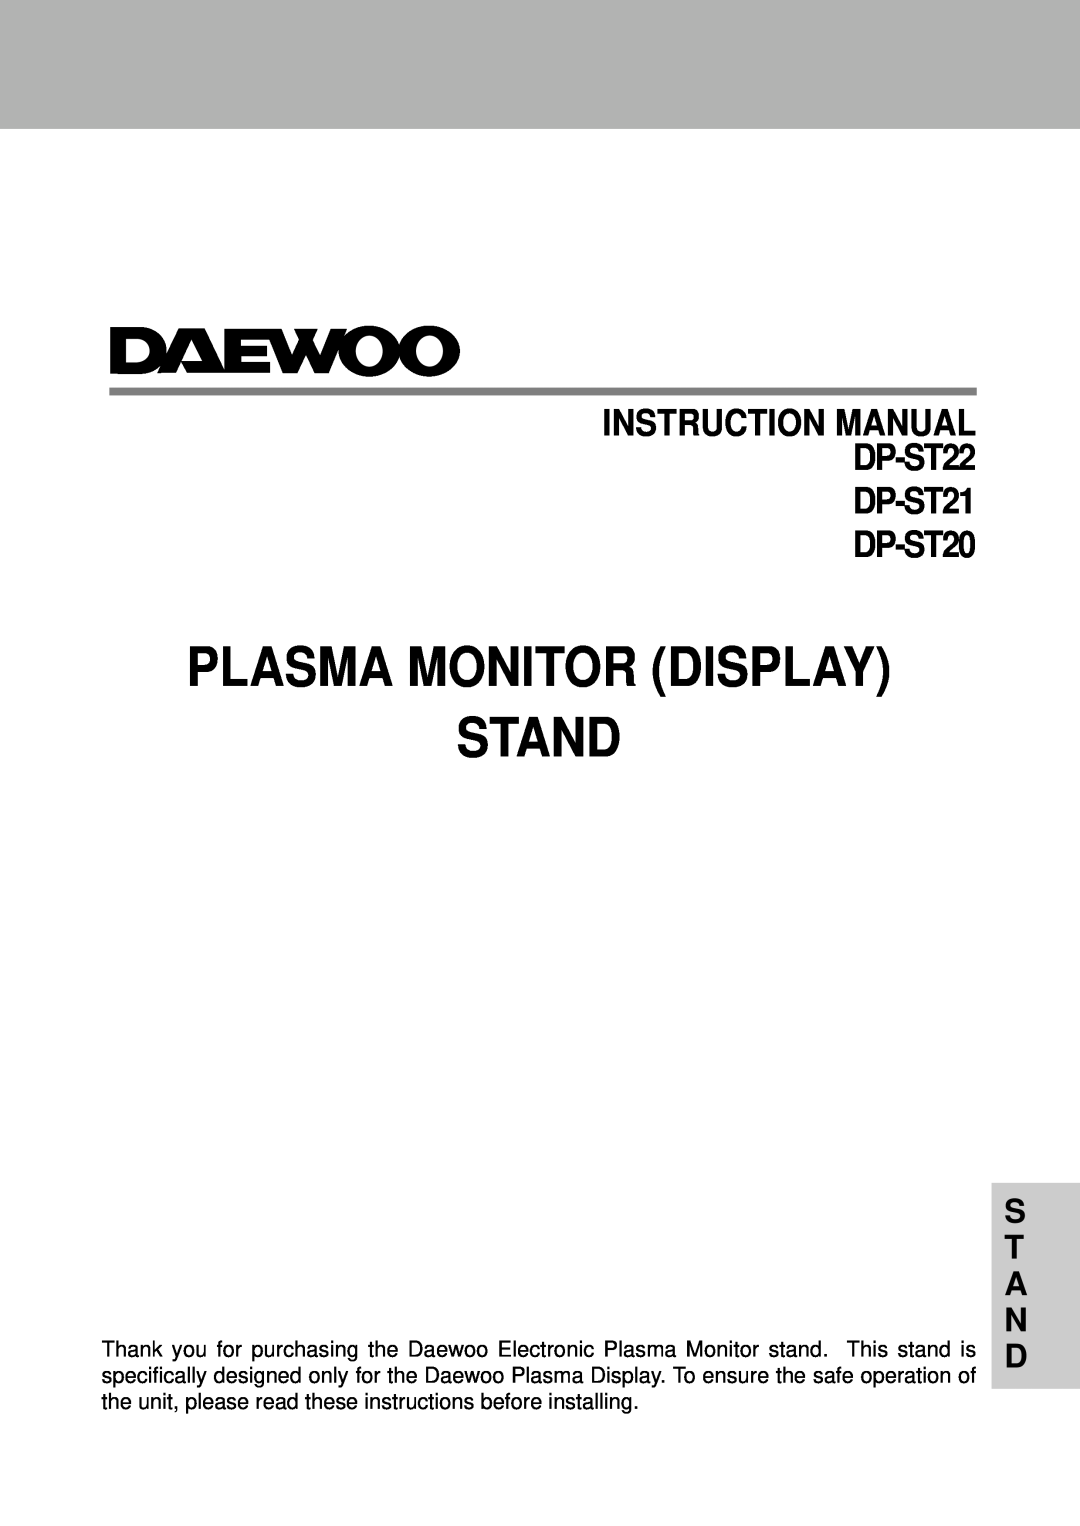 Daewoo instruction manual INSTRUCTION MANUAL DP-ST22 DP-ST21 DP-ST20, Plasma Monitor Display Stand, S T A N D 